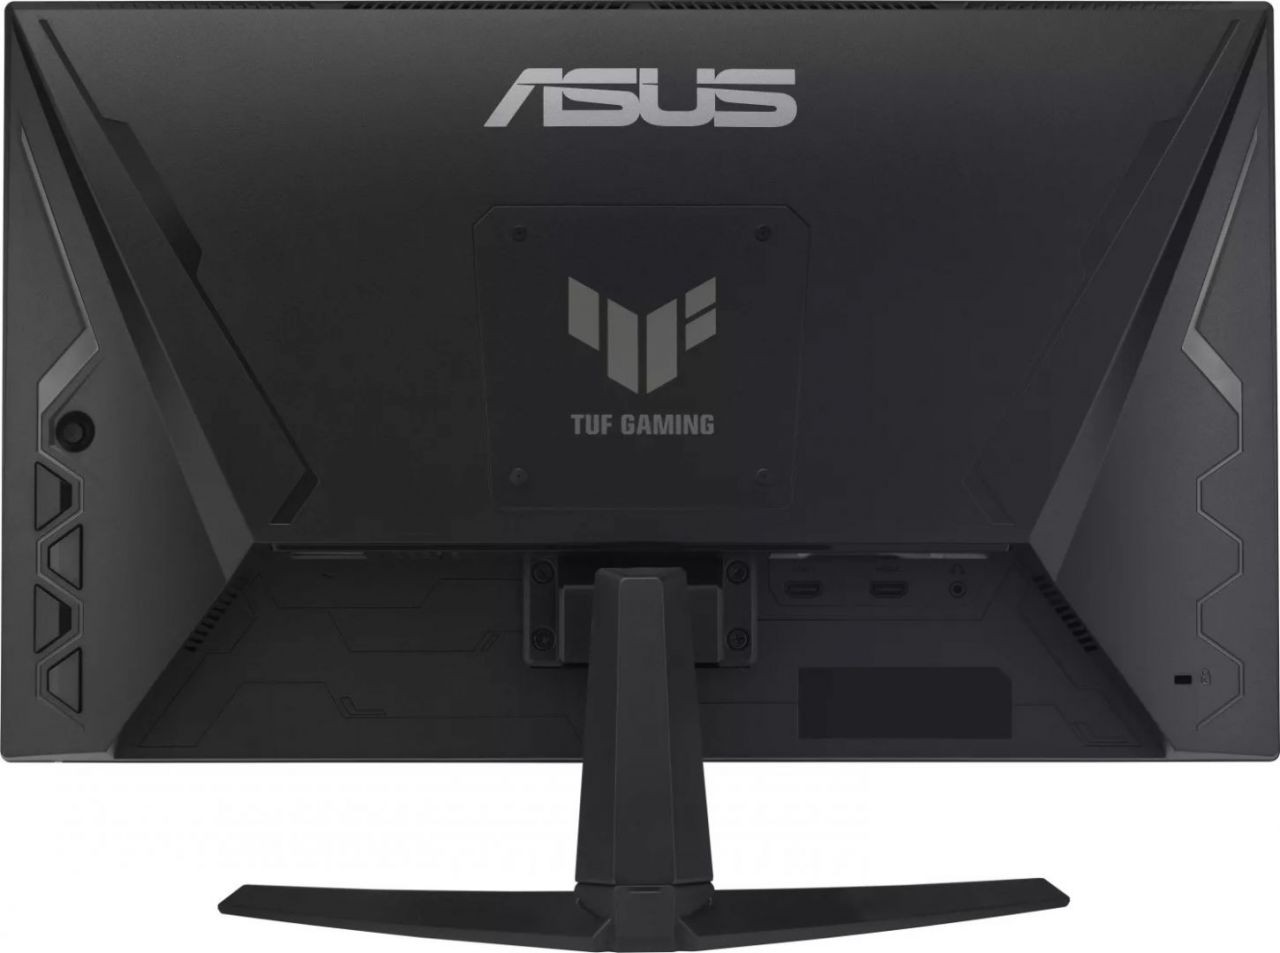 Asus 23,8" VG246H1A IPS LED